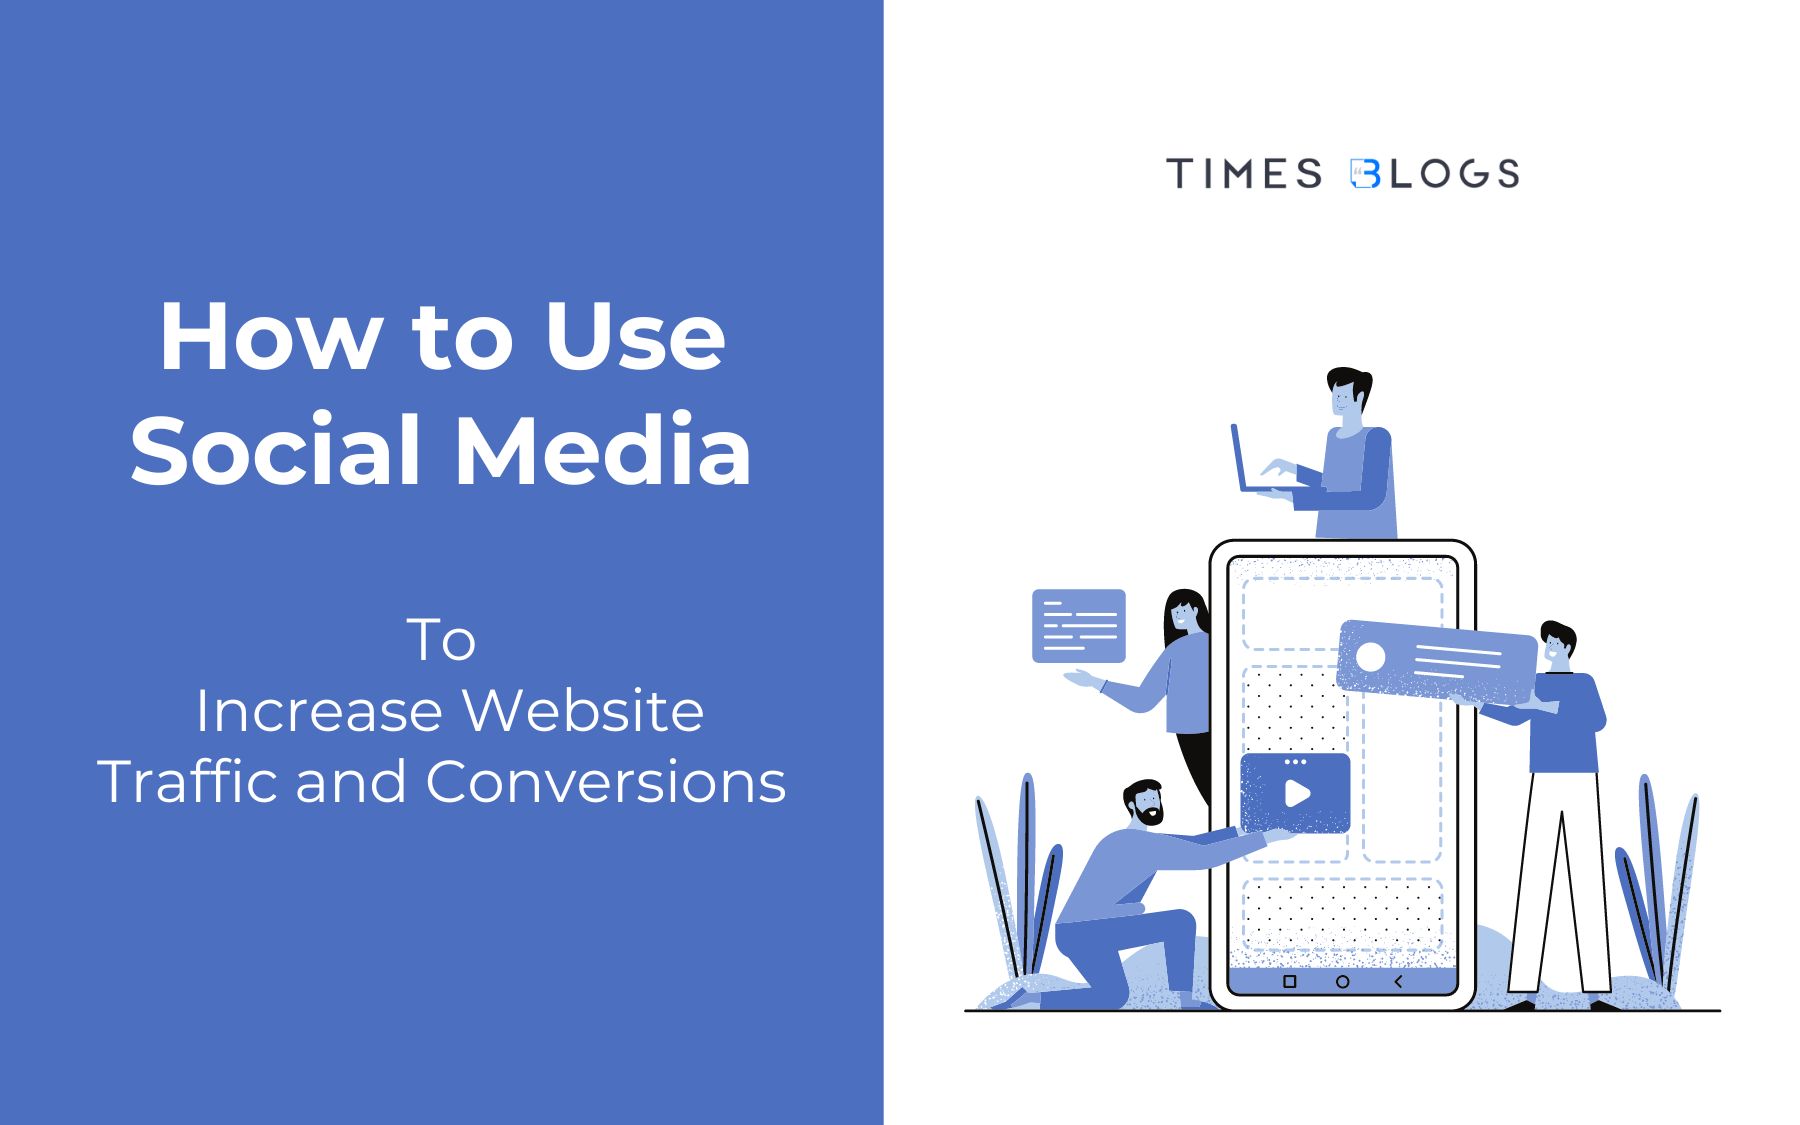 How to Use Social Media to Increase Website Traffic and Conversions